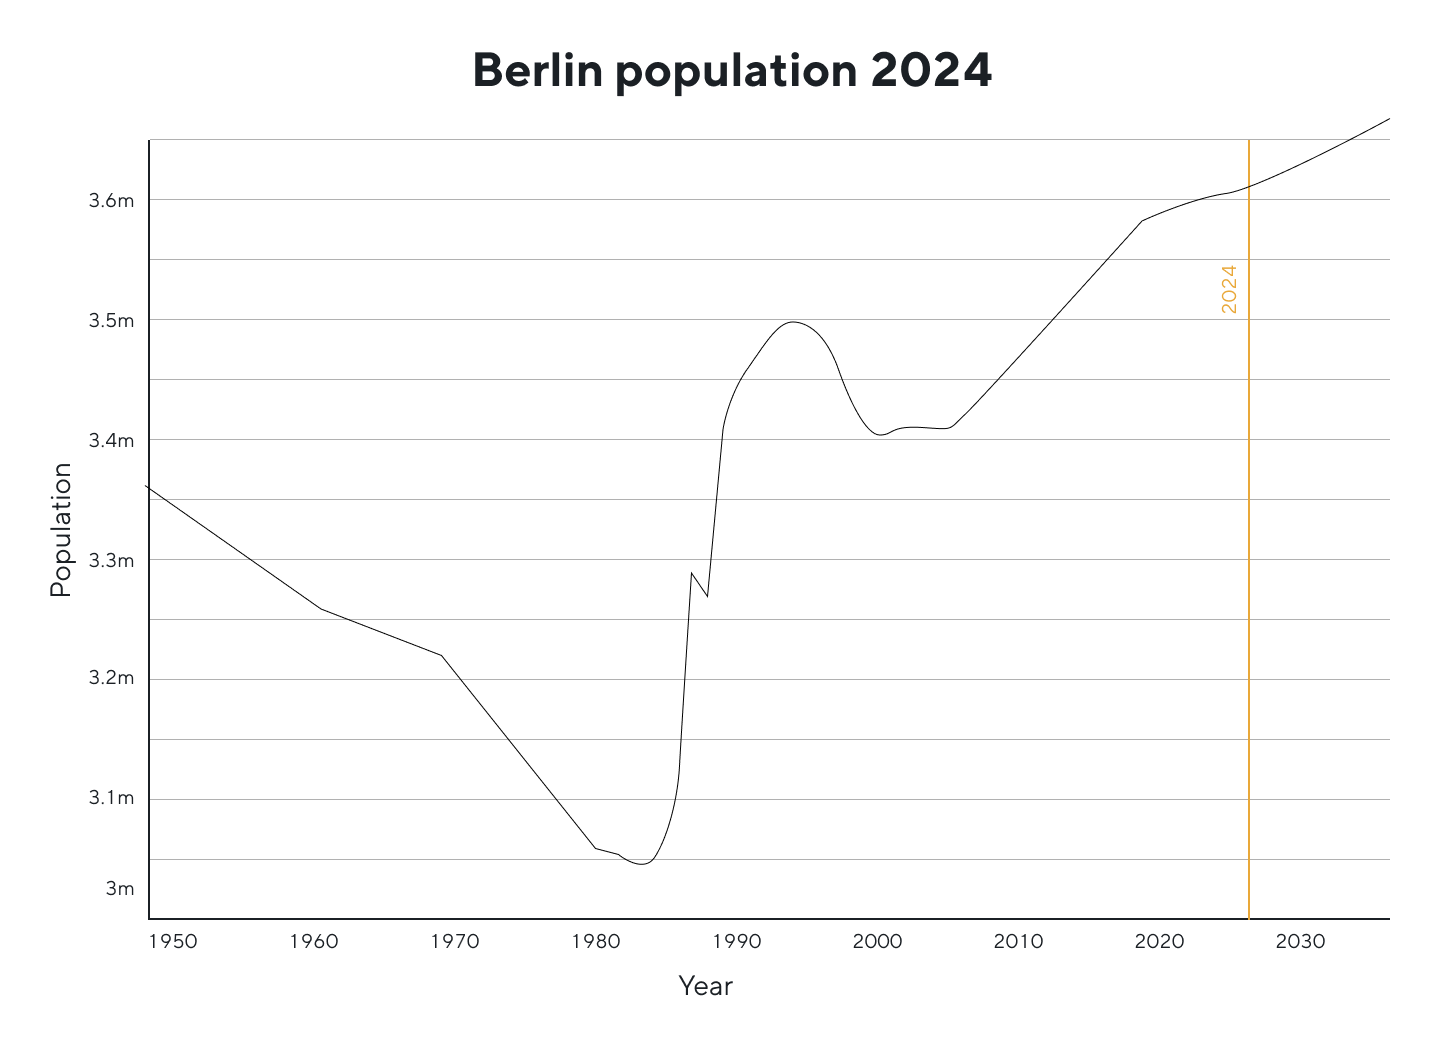 Housing crisis due to population growth in Berlin